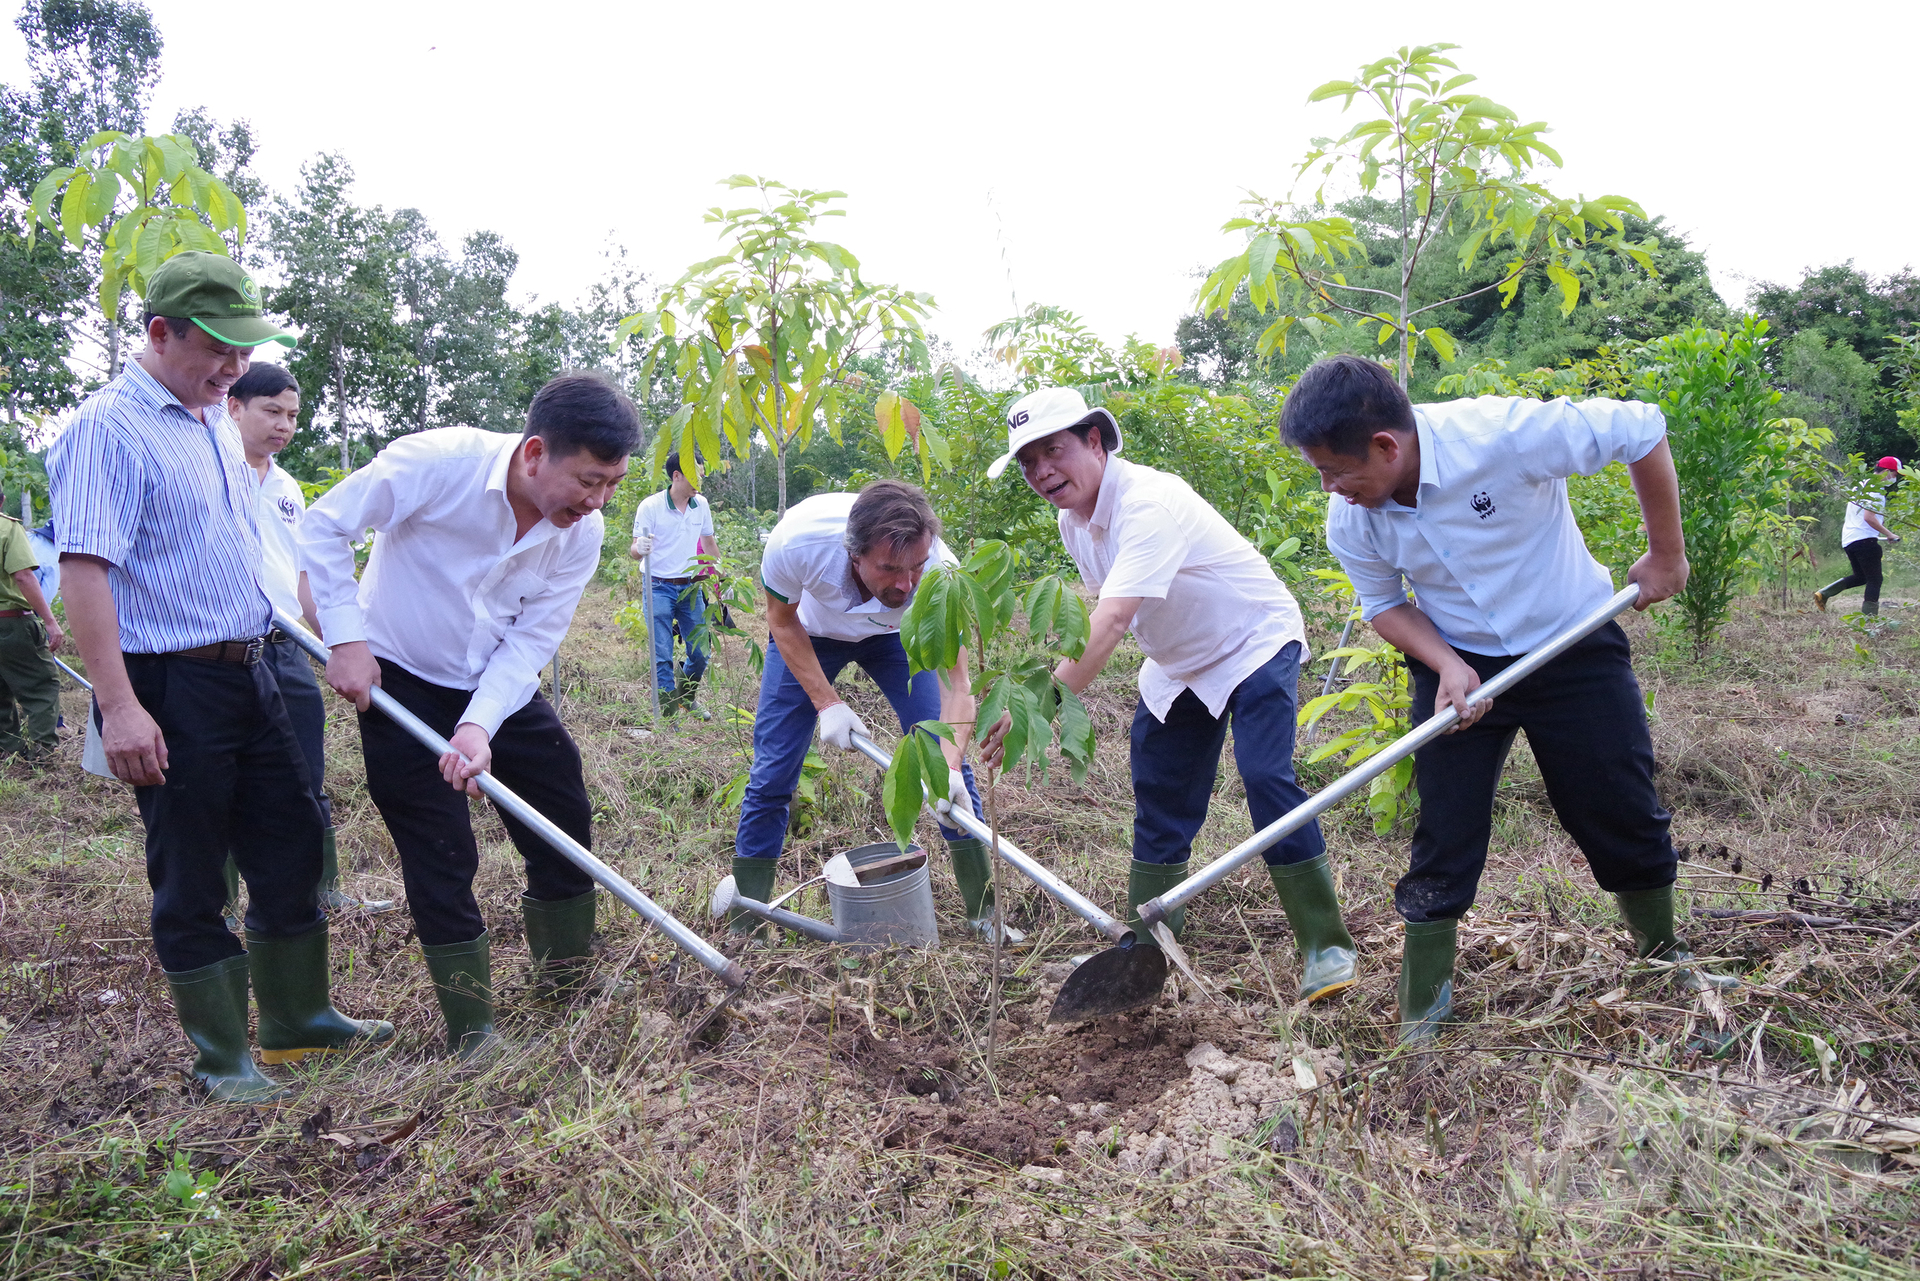 Leaders of the Ministry of Agriculture and Rural Development, WWF-Vietnam, and Heineken Vietnam participated in planting trees in the reserve. Photo: Nguyen Thuy.